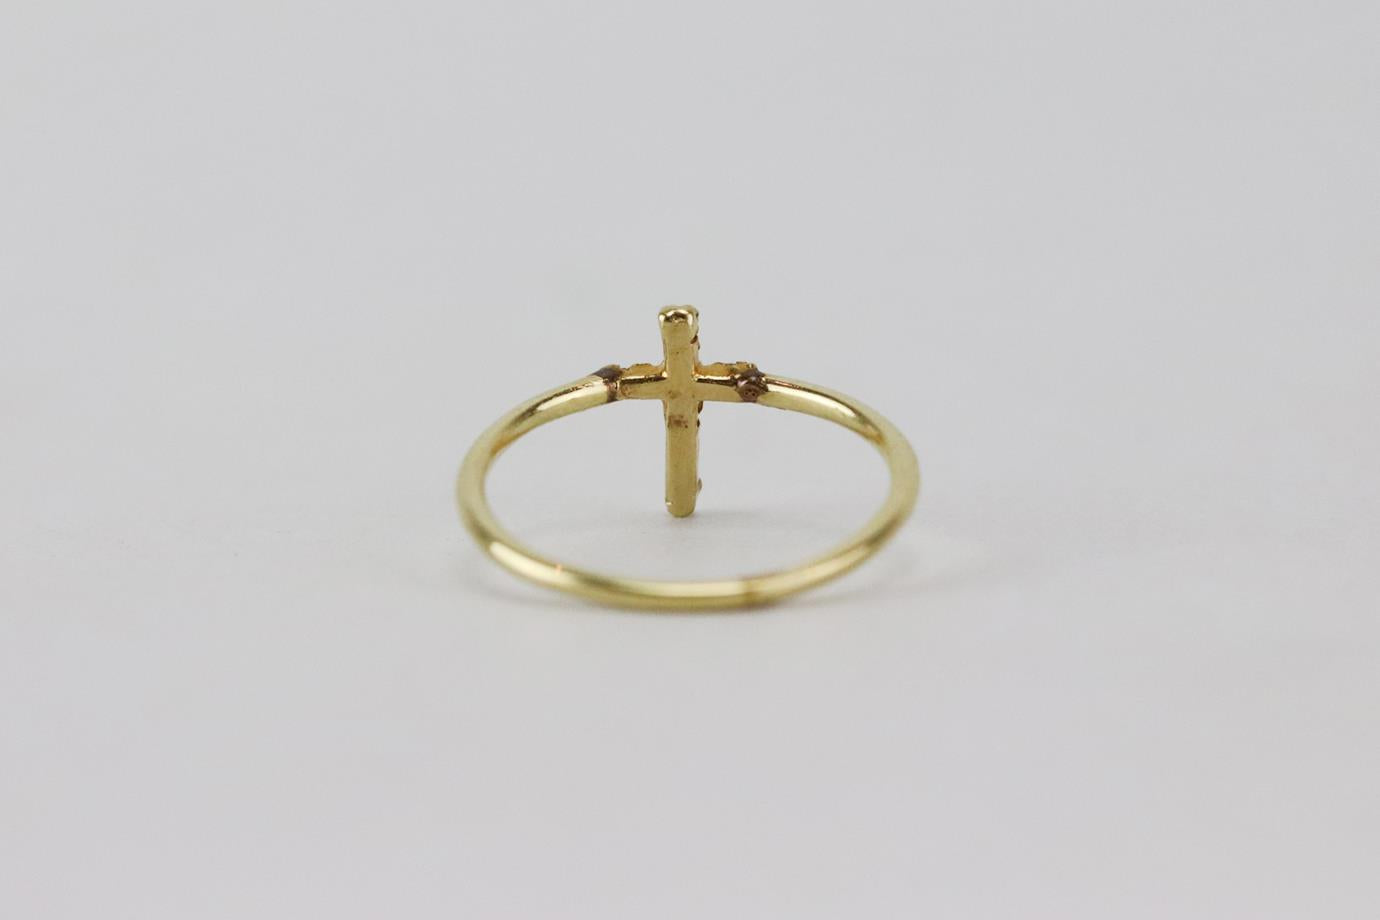 JACQUIE AICHE 14K YELLOW GOLD AND DIAMOND CROSS RING 15 MM